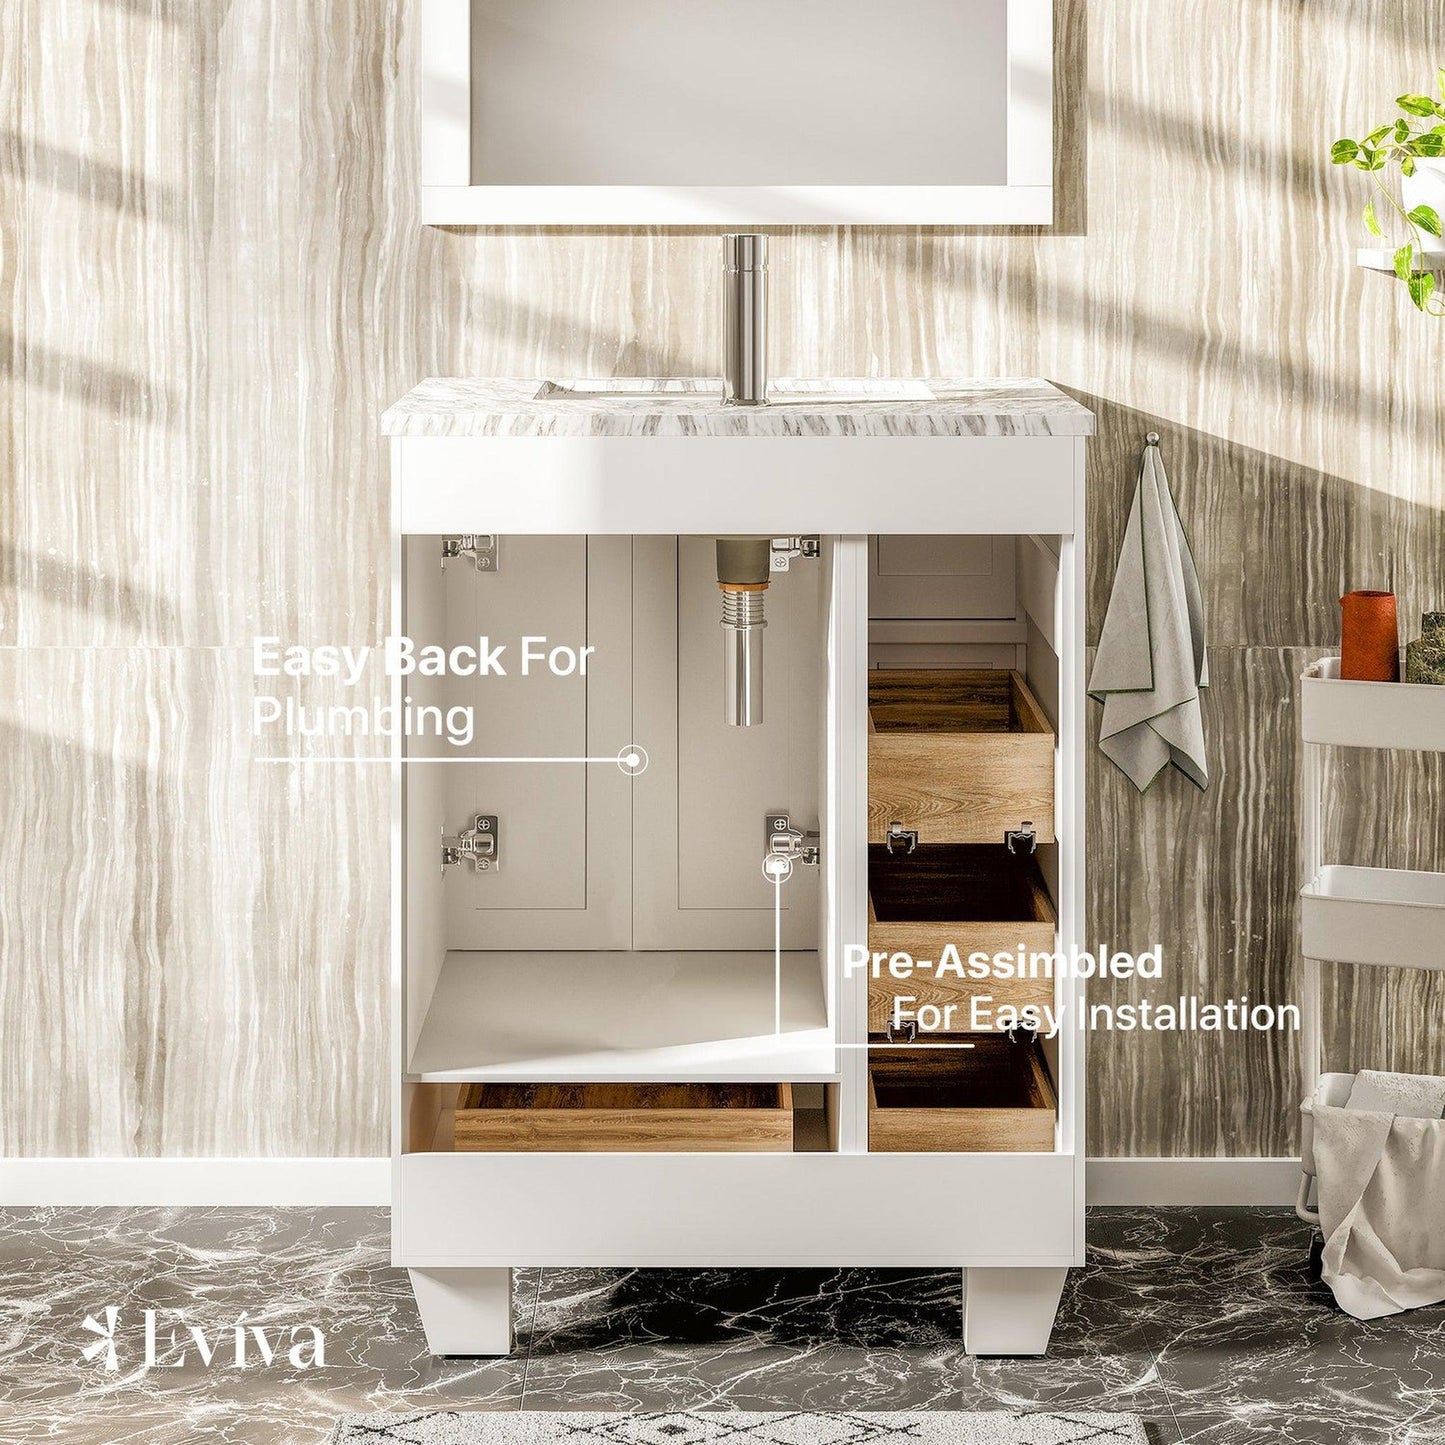 Eviva Happy 28" x 34" Freestanding White Bathroom Vanity With White Carrara Marble Top and Single Undermount Porcelain Sink